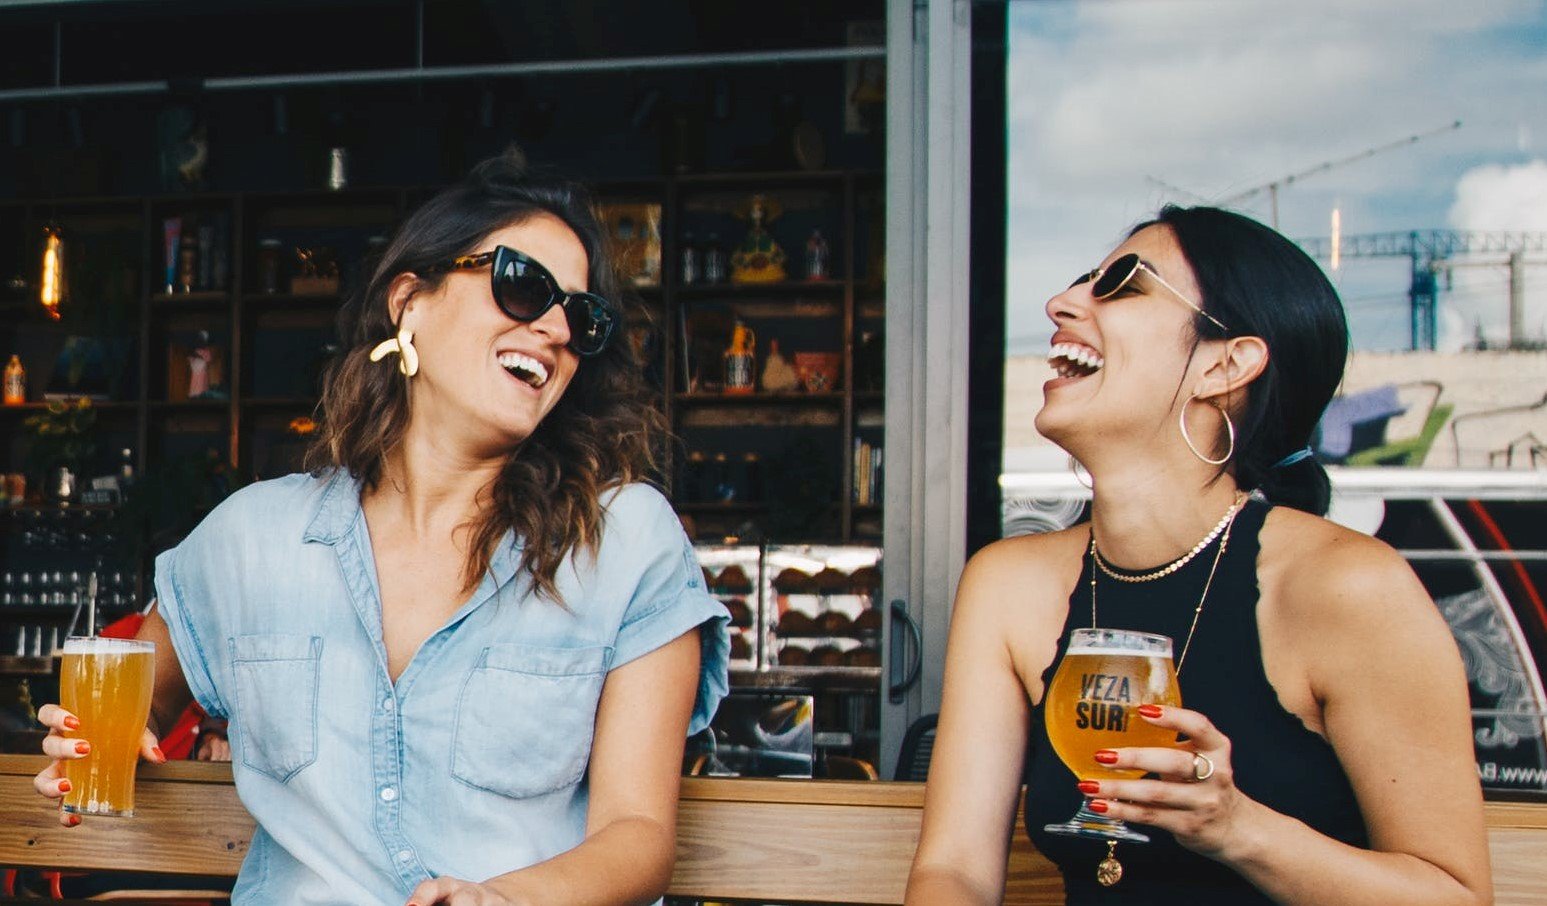 People at the restaurant started laughing at the woman. | Source: Pexels